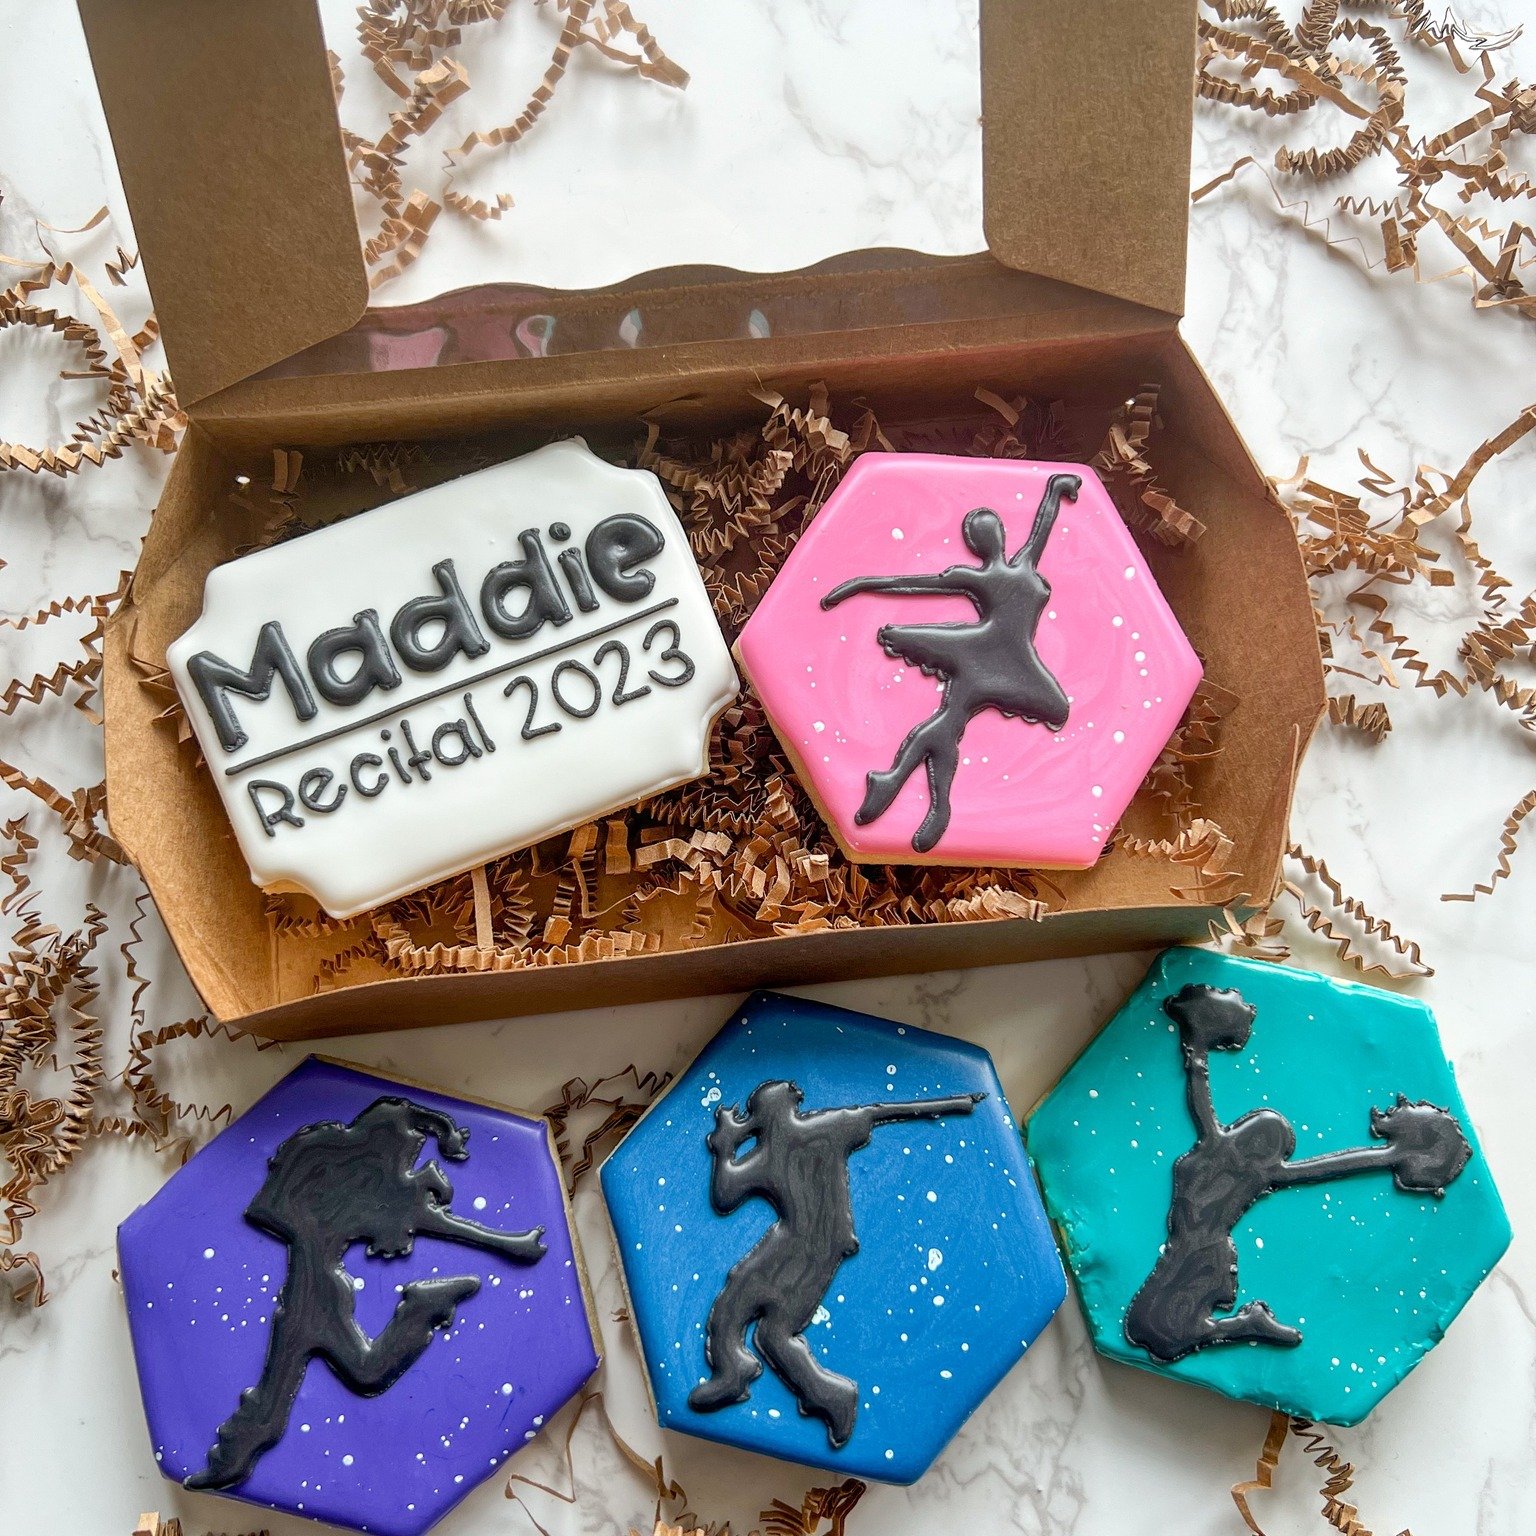 🩰 The Roots end of year recital is coming up! Show your favorite dancer/cheerleader some love with yummy (personalized) cookies! 🩰
&bull;
Link to order in my bio
&bull;
🇮🇱 My heart is always with the people of Israel 🇮🇱 #amyisraelchai #stopjewh